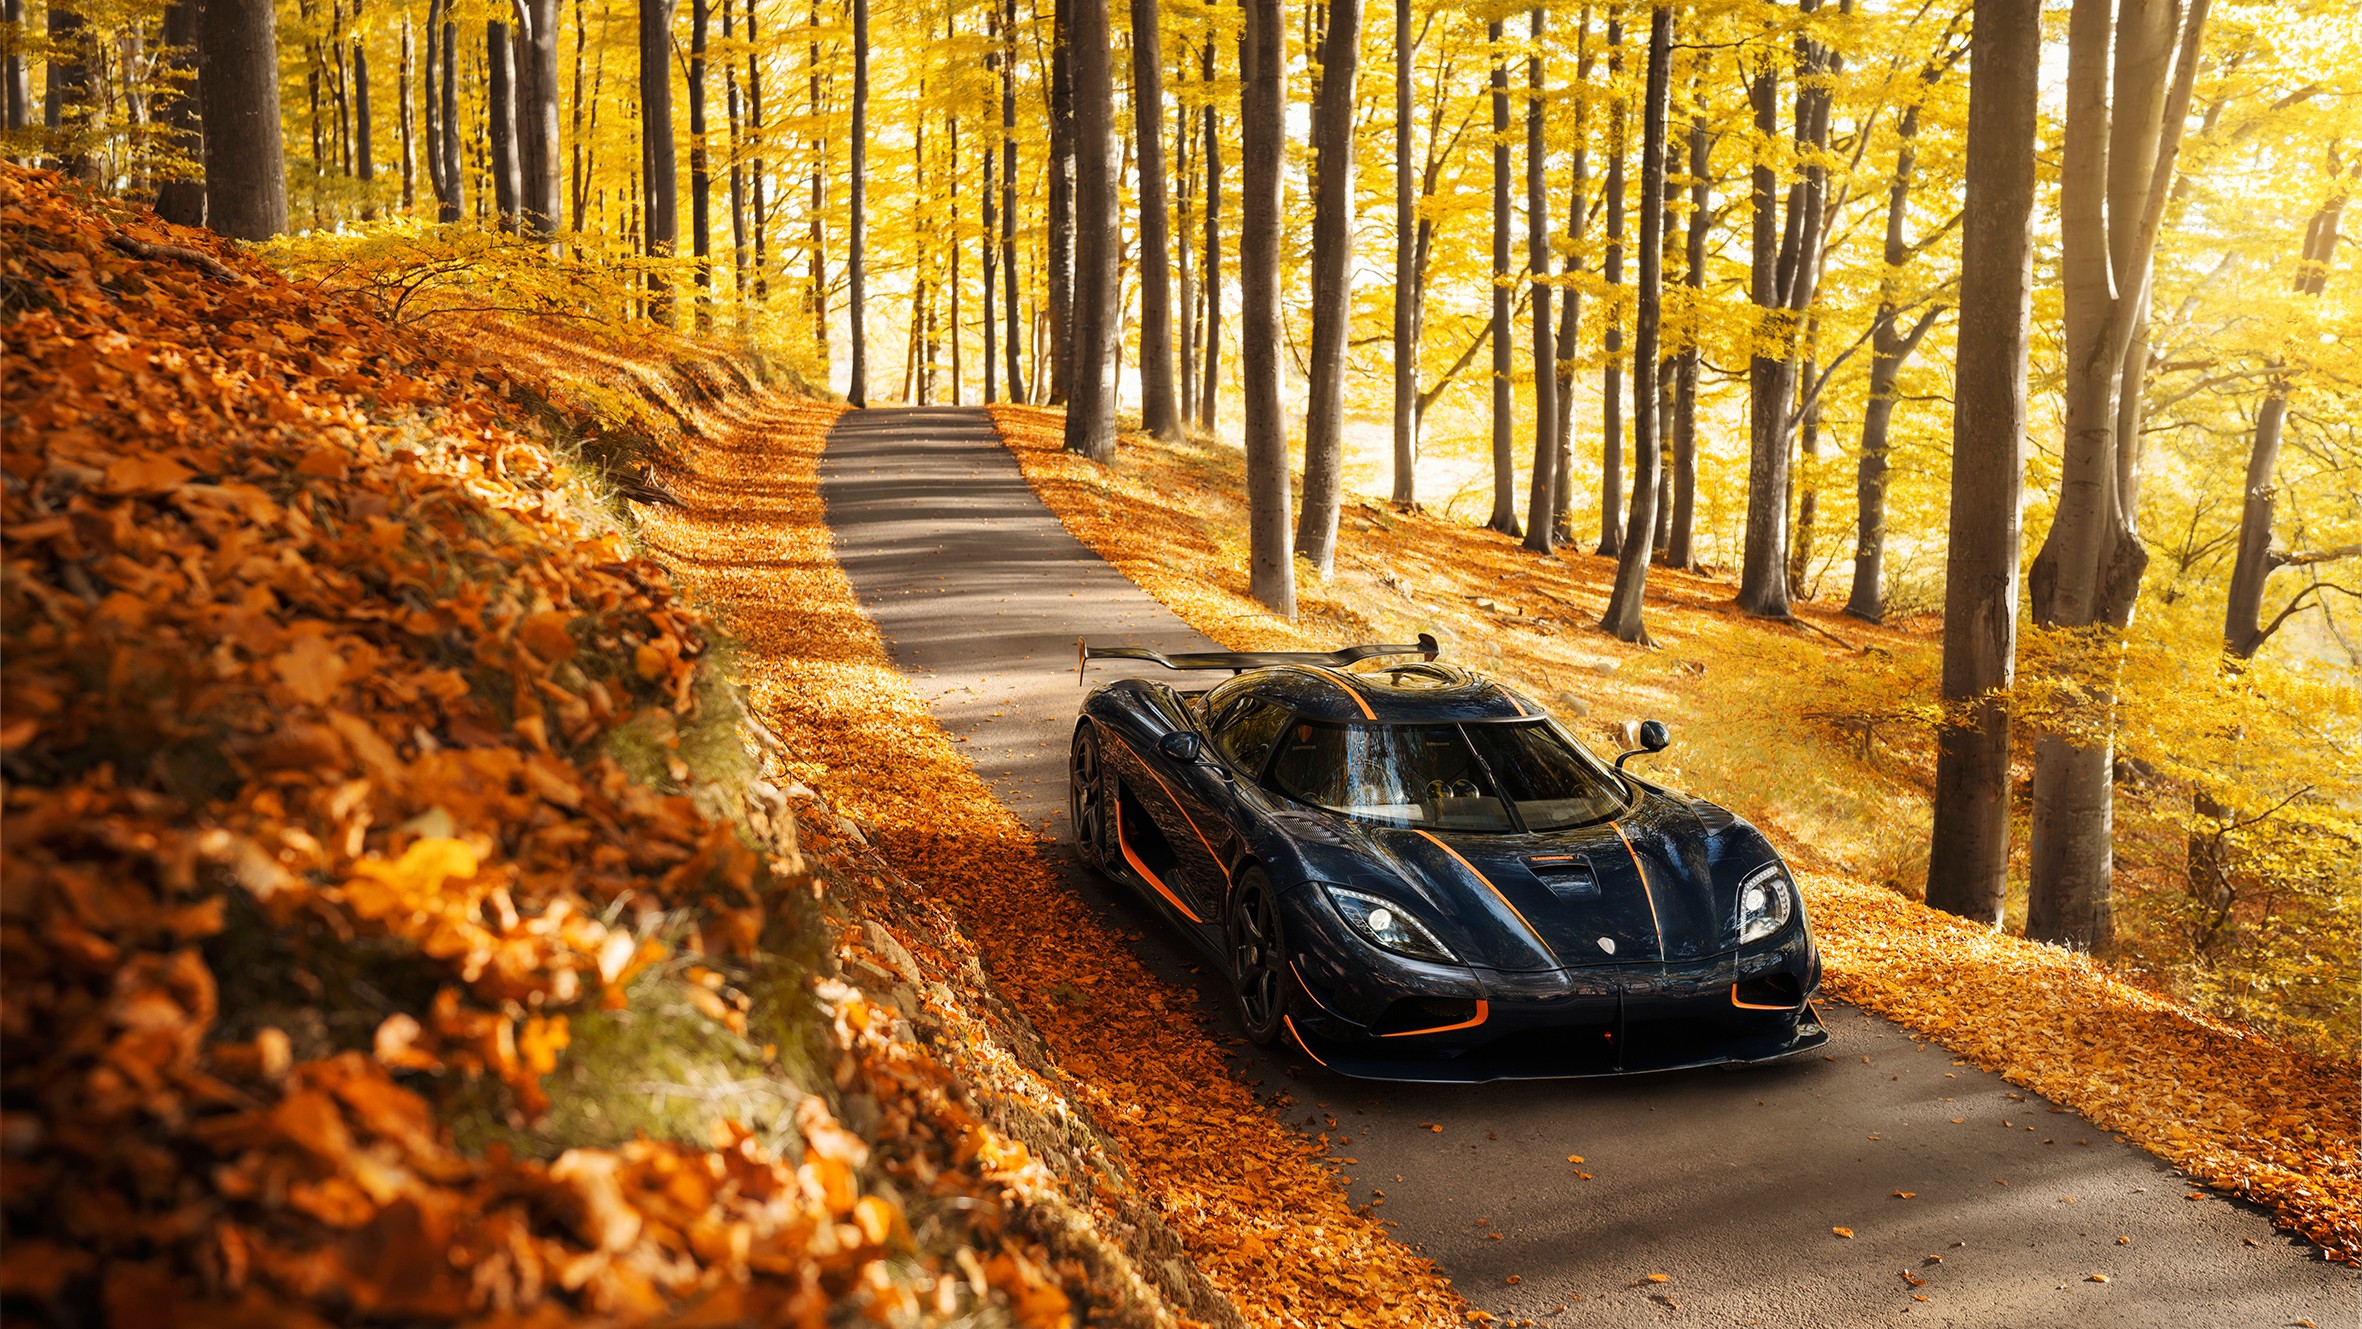 car, Nature, Fall, Leaves, Trees, Koenigsegg, Koenigsegg Agera, Road, Forest, Sunlight, Supercars, Sports car HD / Desktop and Mobile Backgrounds